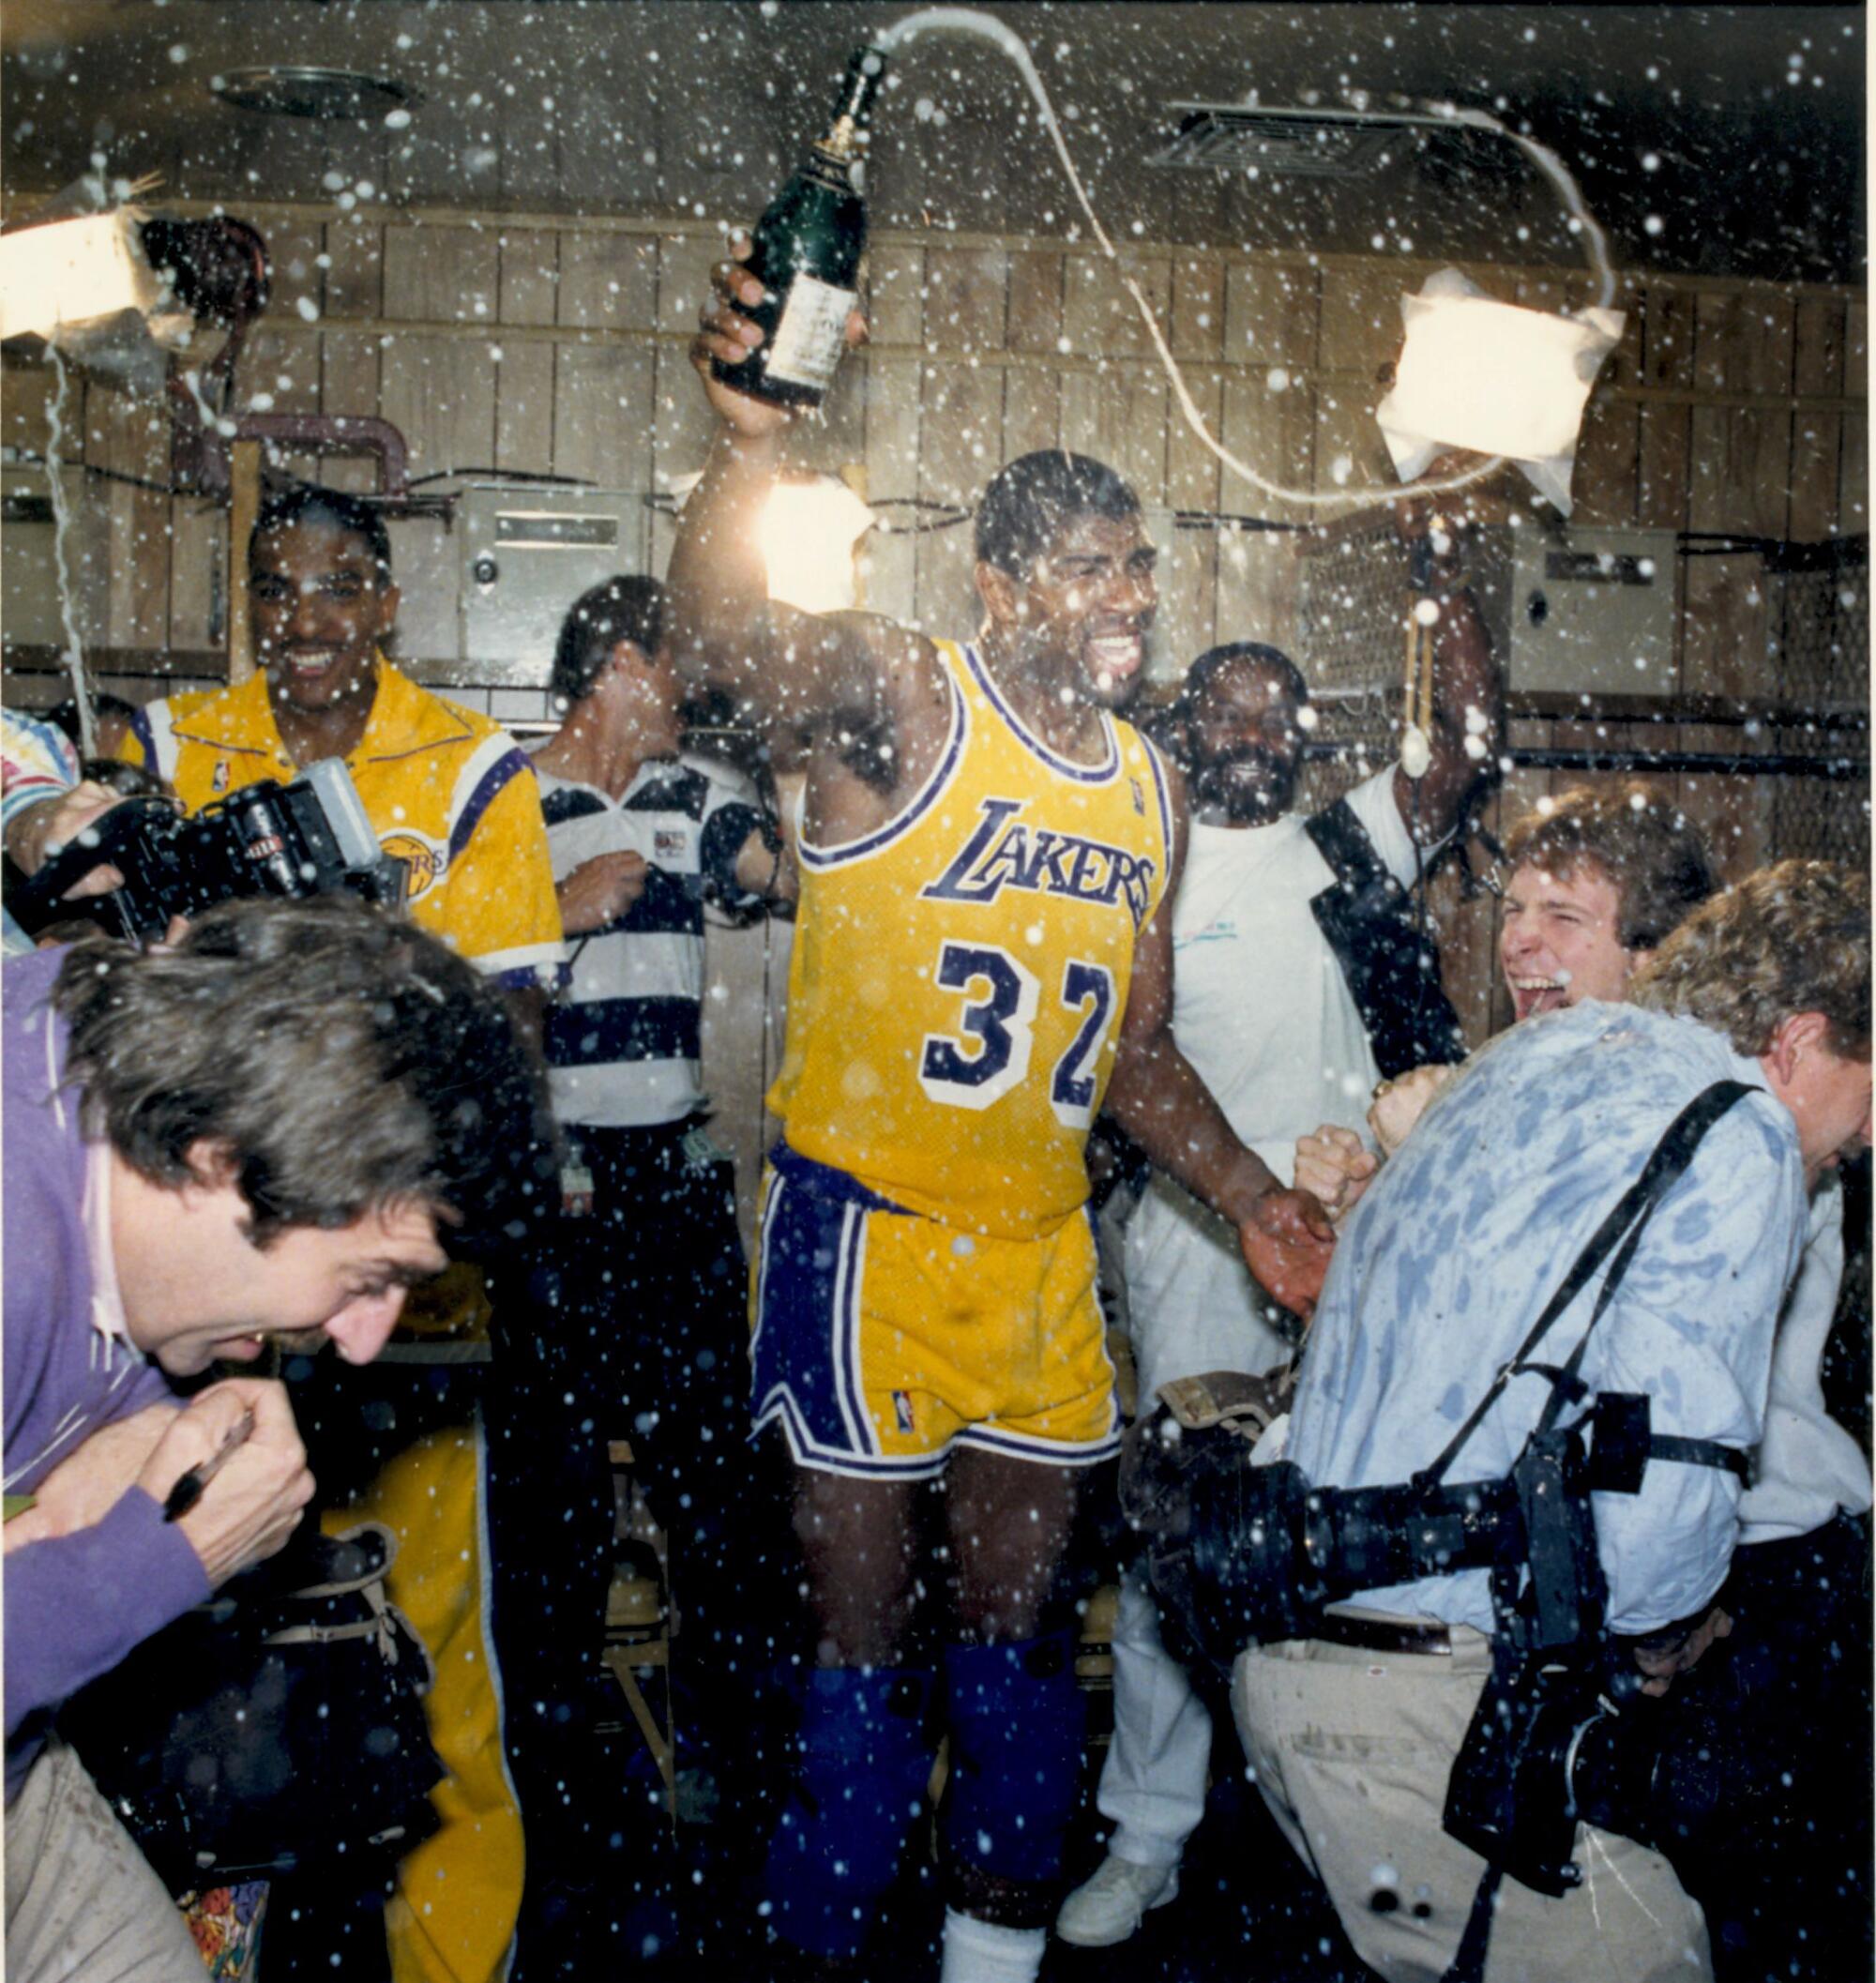 Magic Johnson in a gold Lakers jersey splashes champagne from a bottle around a locker room with players and photographers.